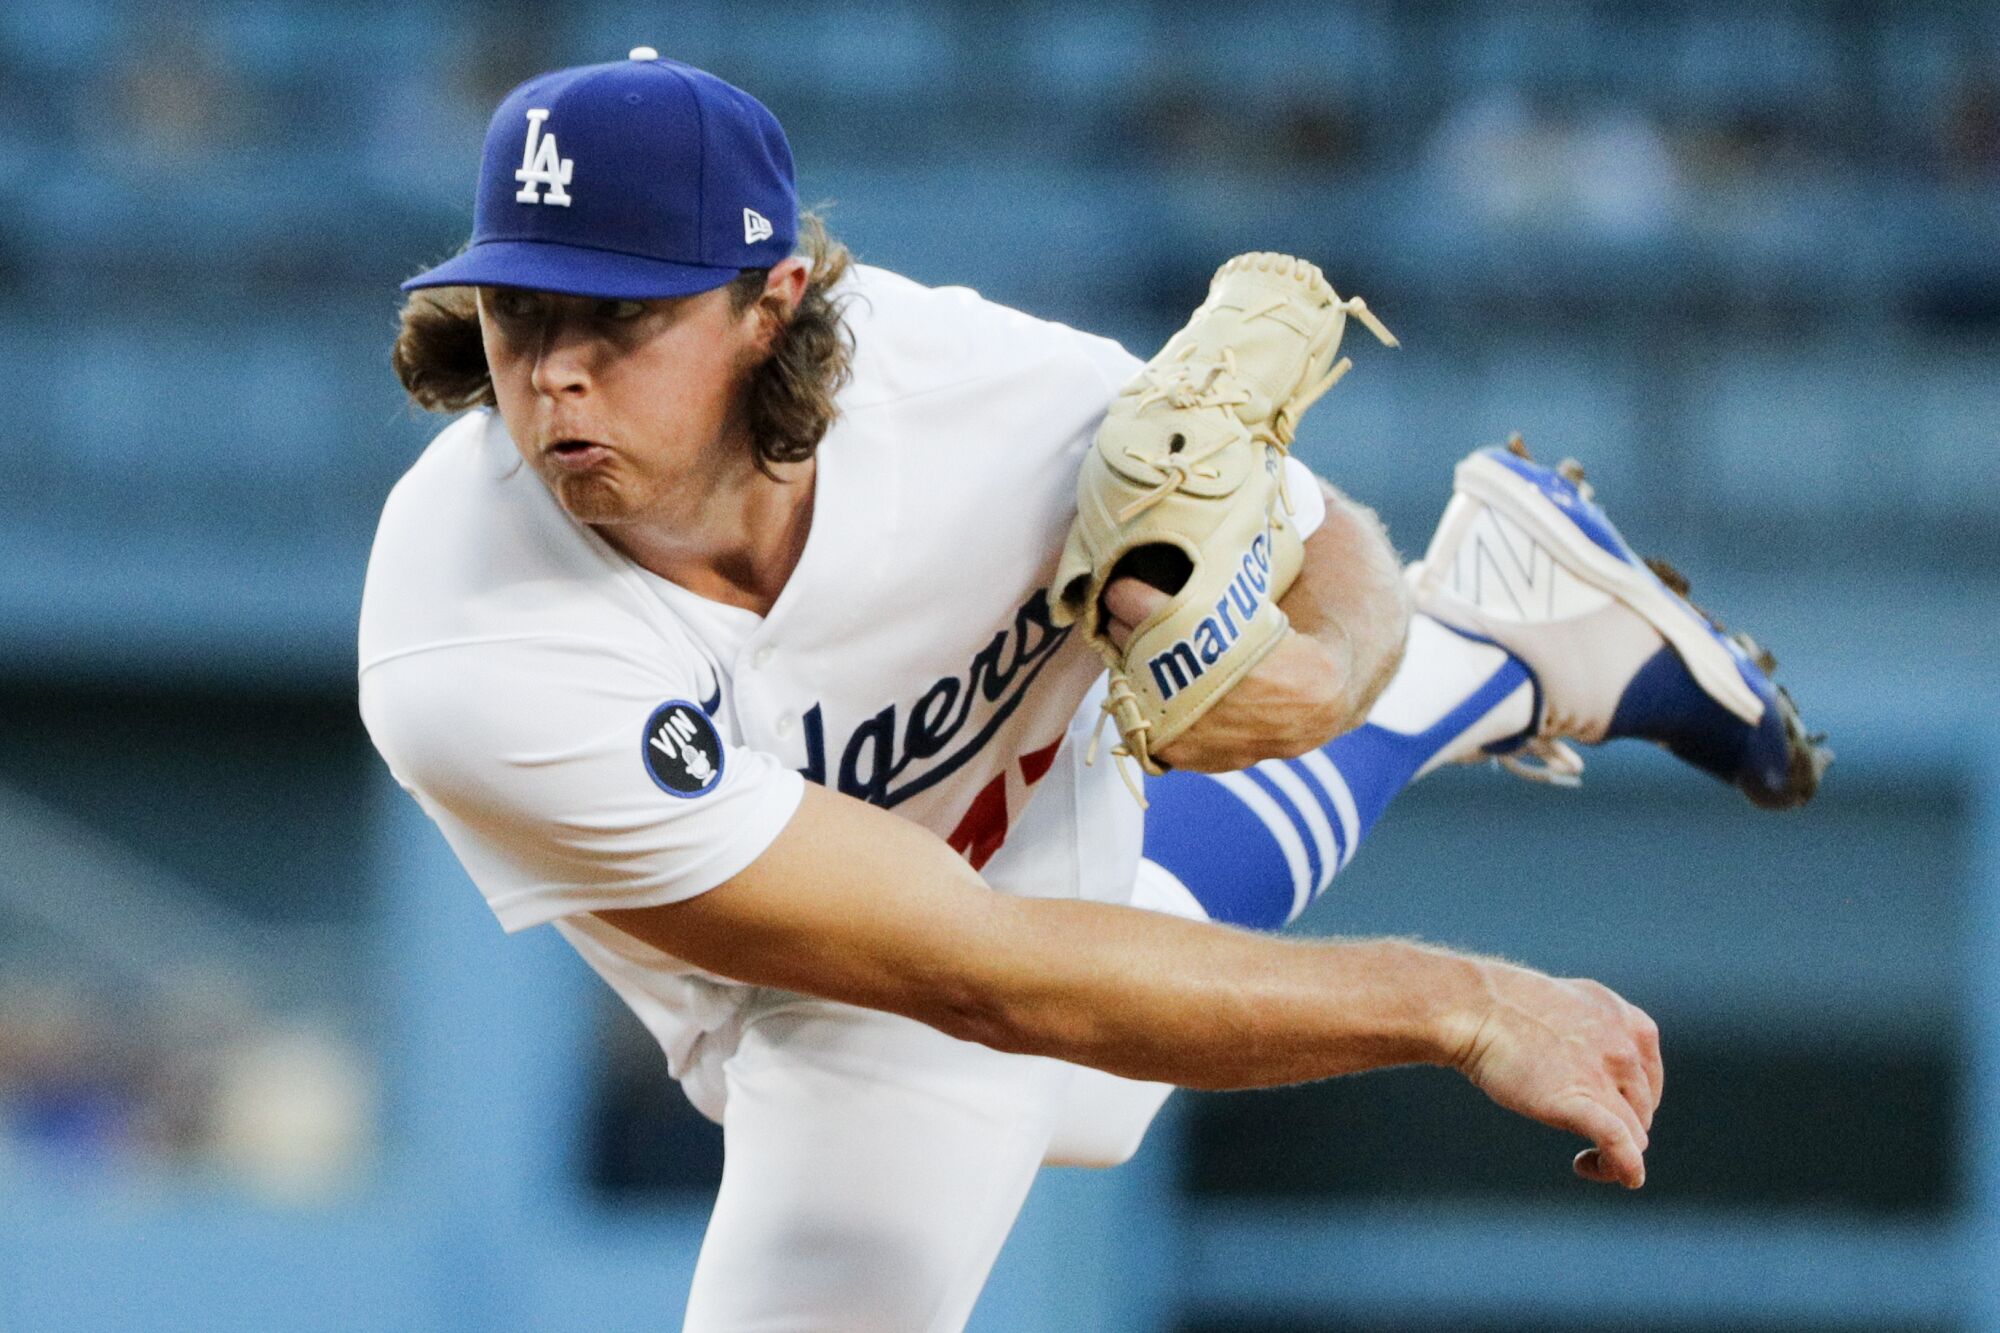 Ryan Pepiot pitches against the Minnesota Twins on Aug. 10, 2022, at Dodger Stadium.